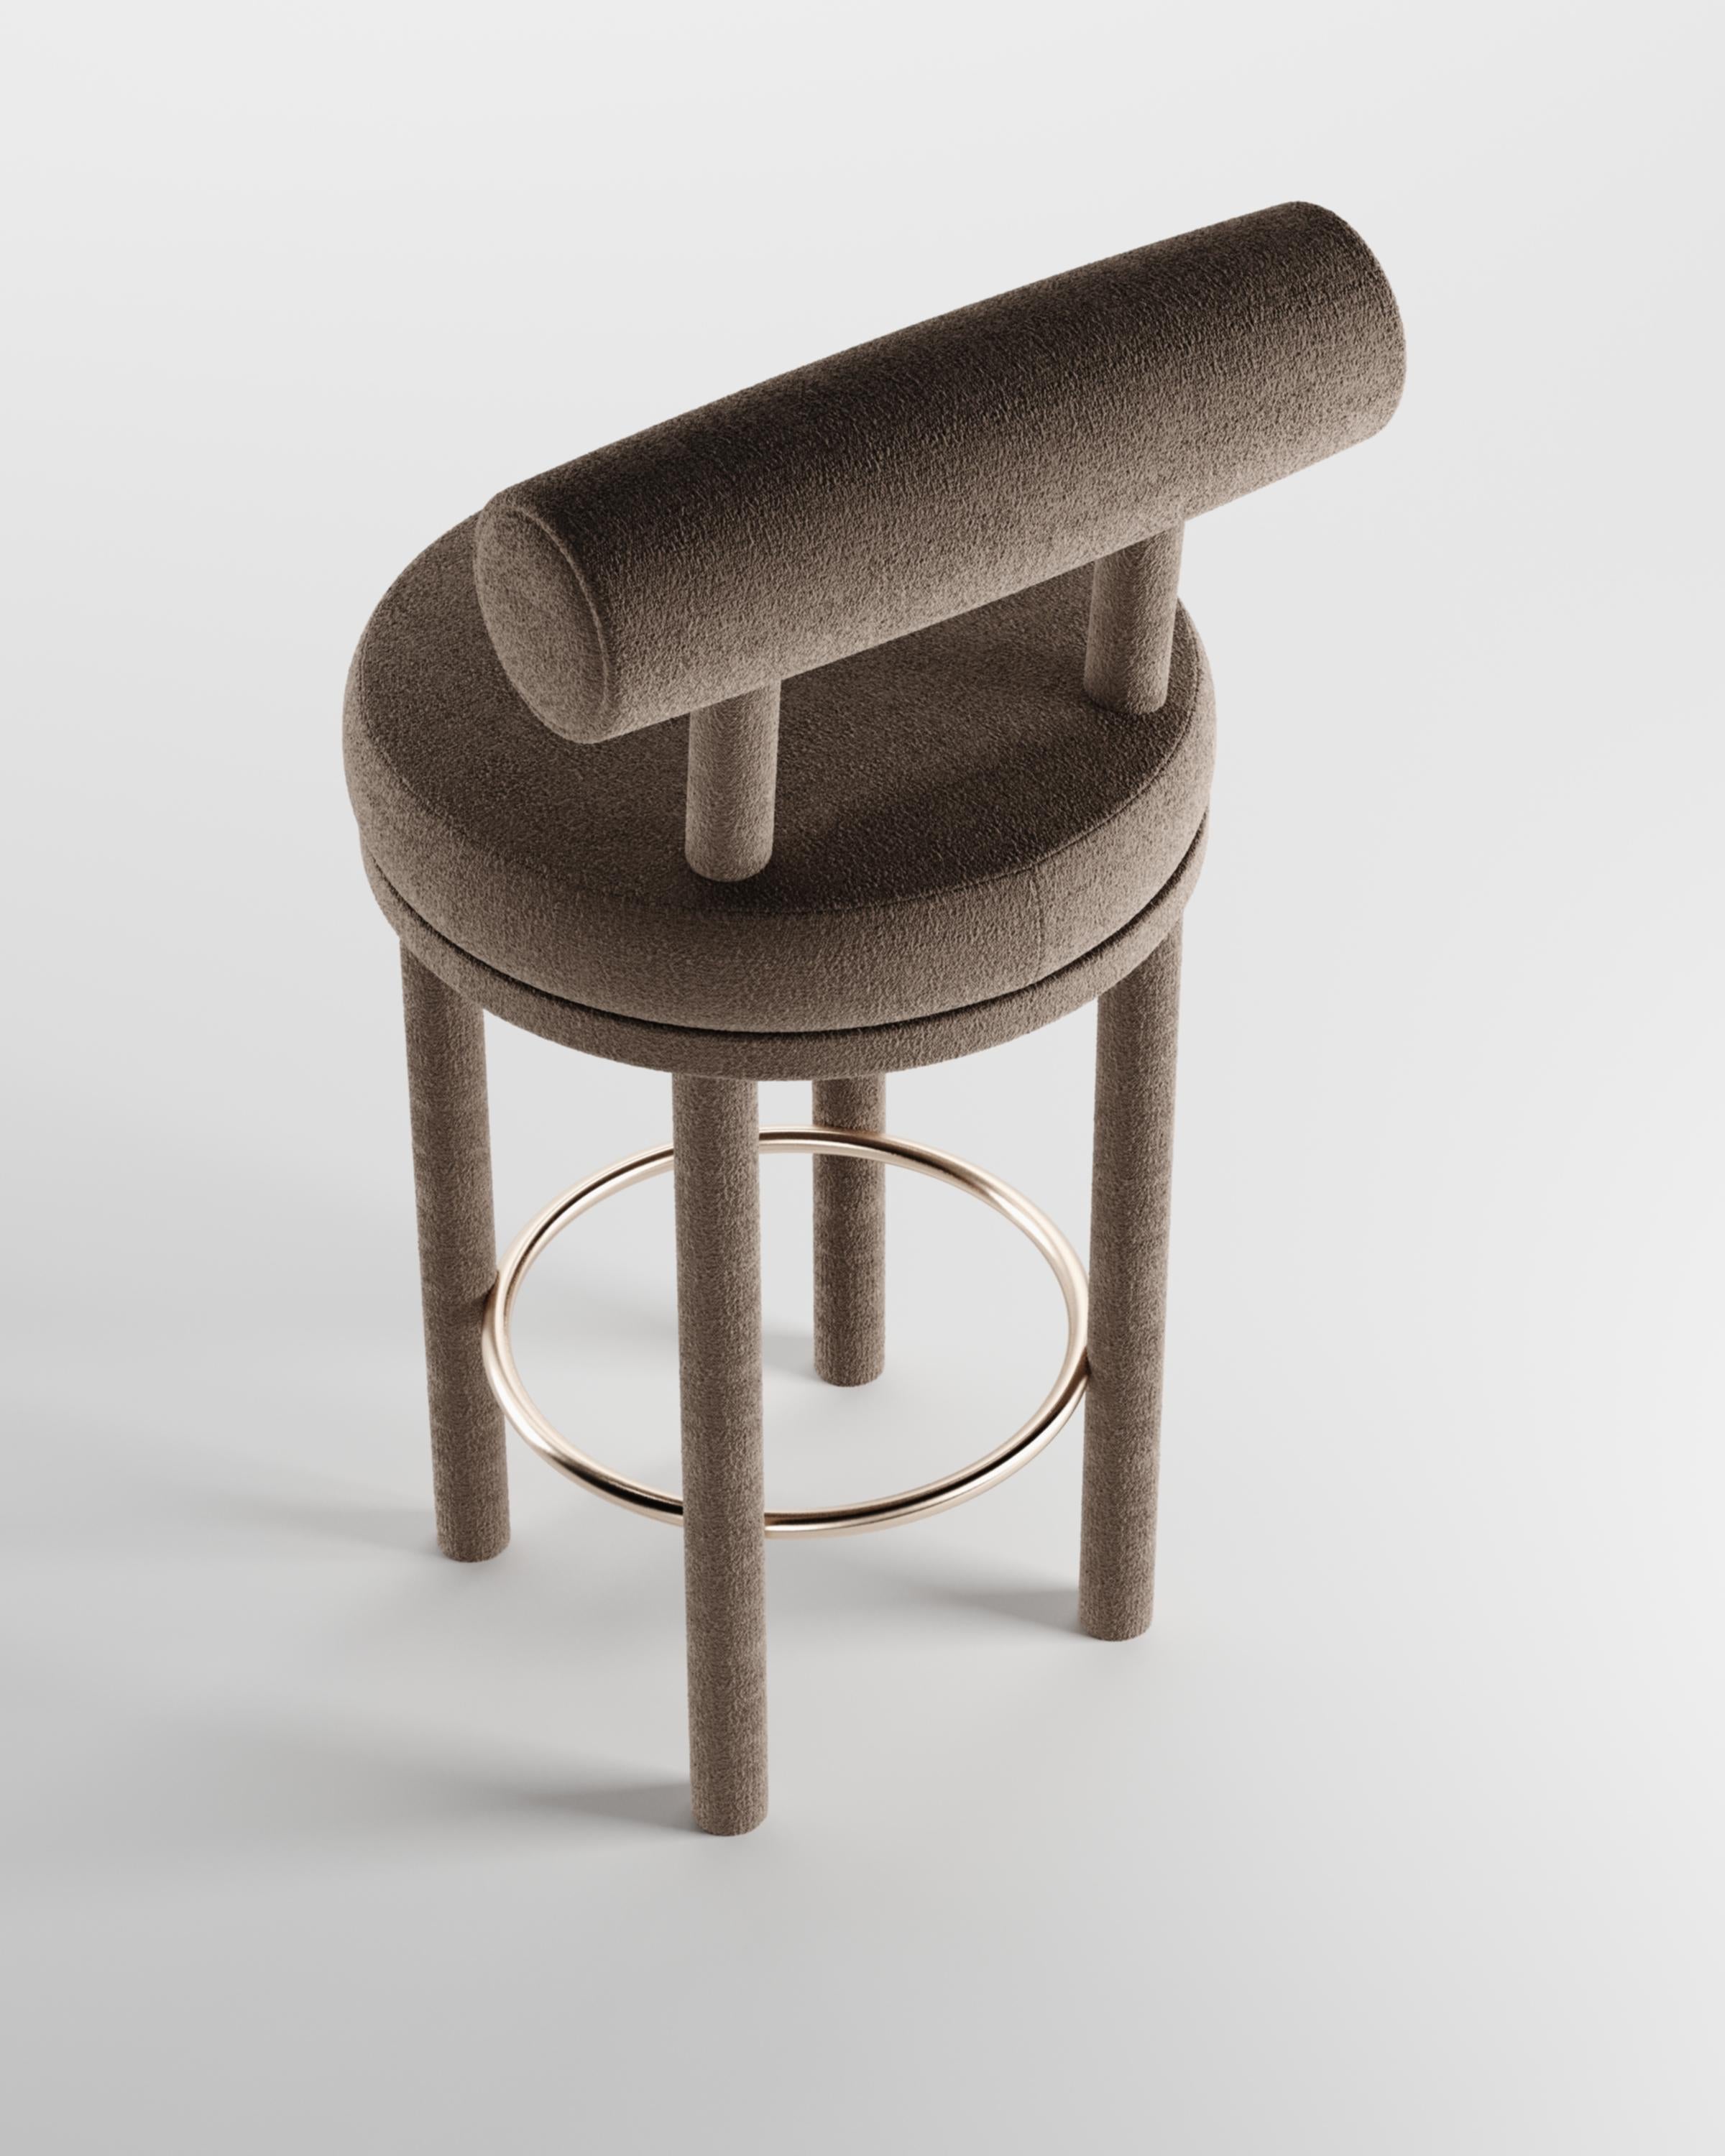 Contemporary Modern Moca bar chair in fabric by Studio Rig for Collector Studio

A chair that mixes both modern and classical design approaches.
Designed to hug the body, durable and solid chair features a body structure produced in solid